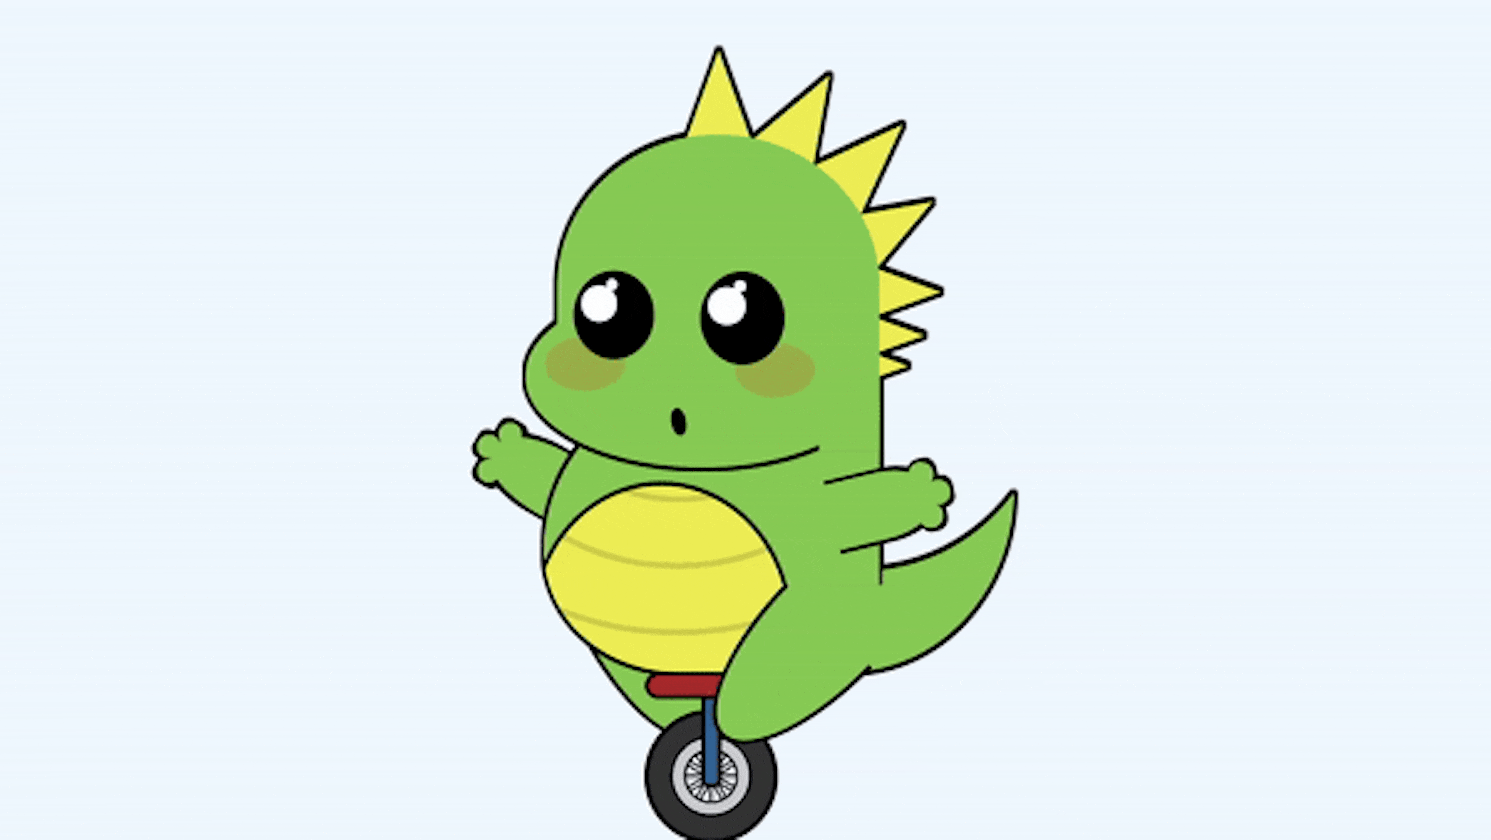 An Animated Dinosaur on a Unicycle Using HTML and CSS